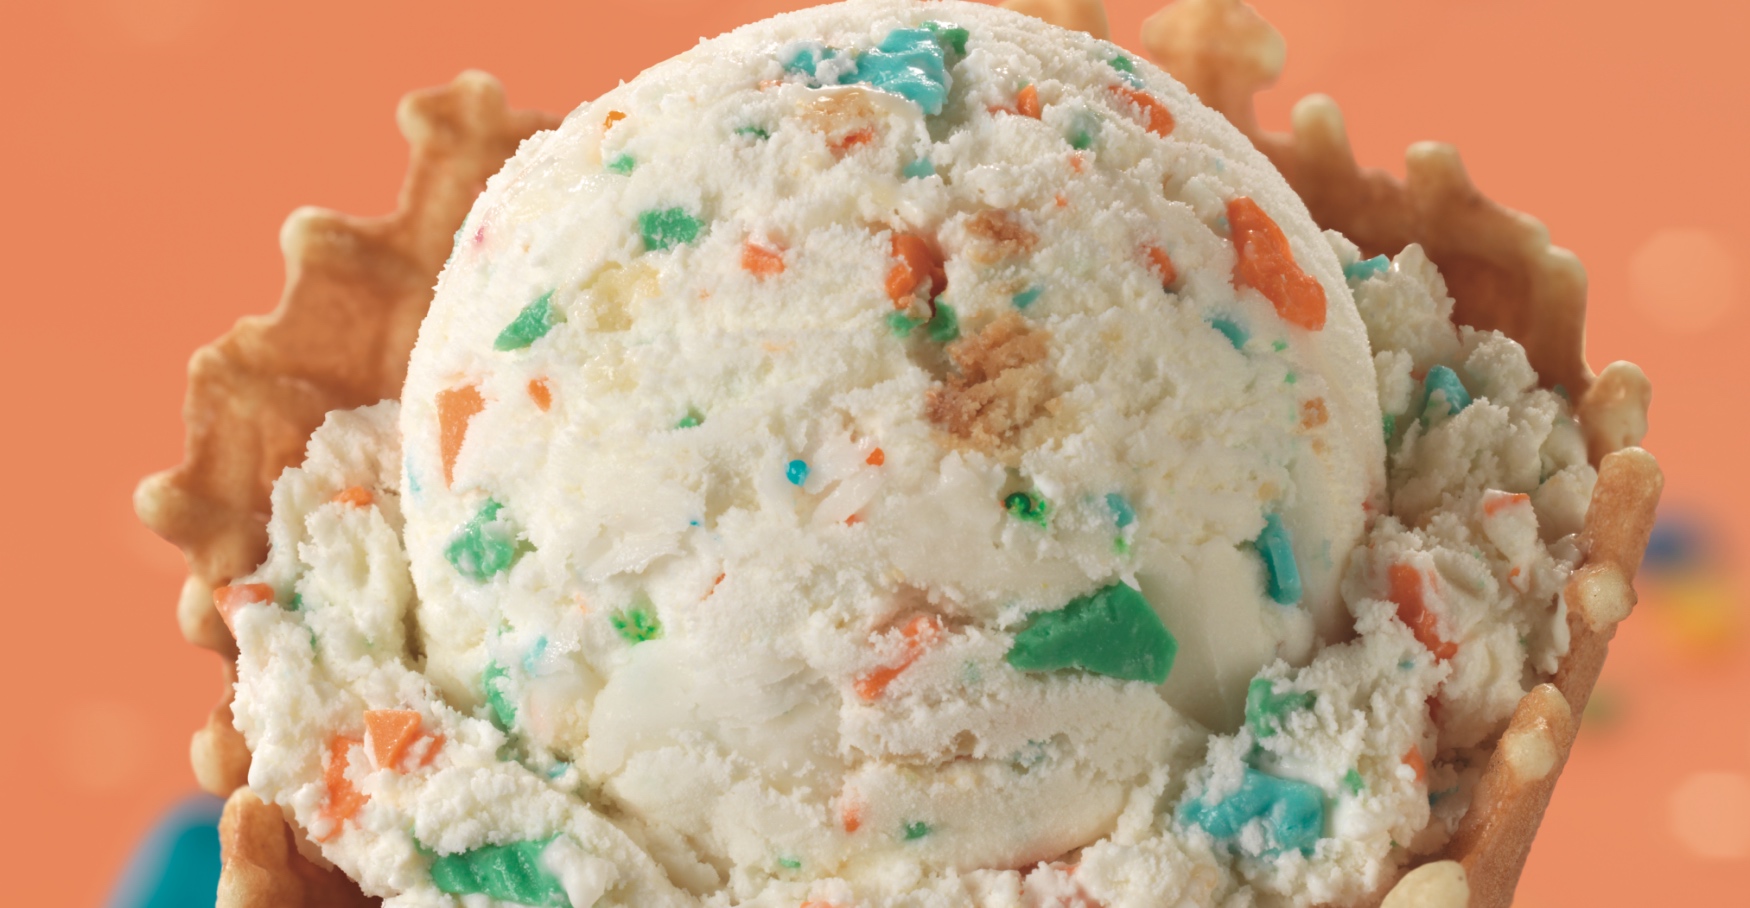 The Story Behind Baskin-Robbins' Icing on the Cake®